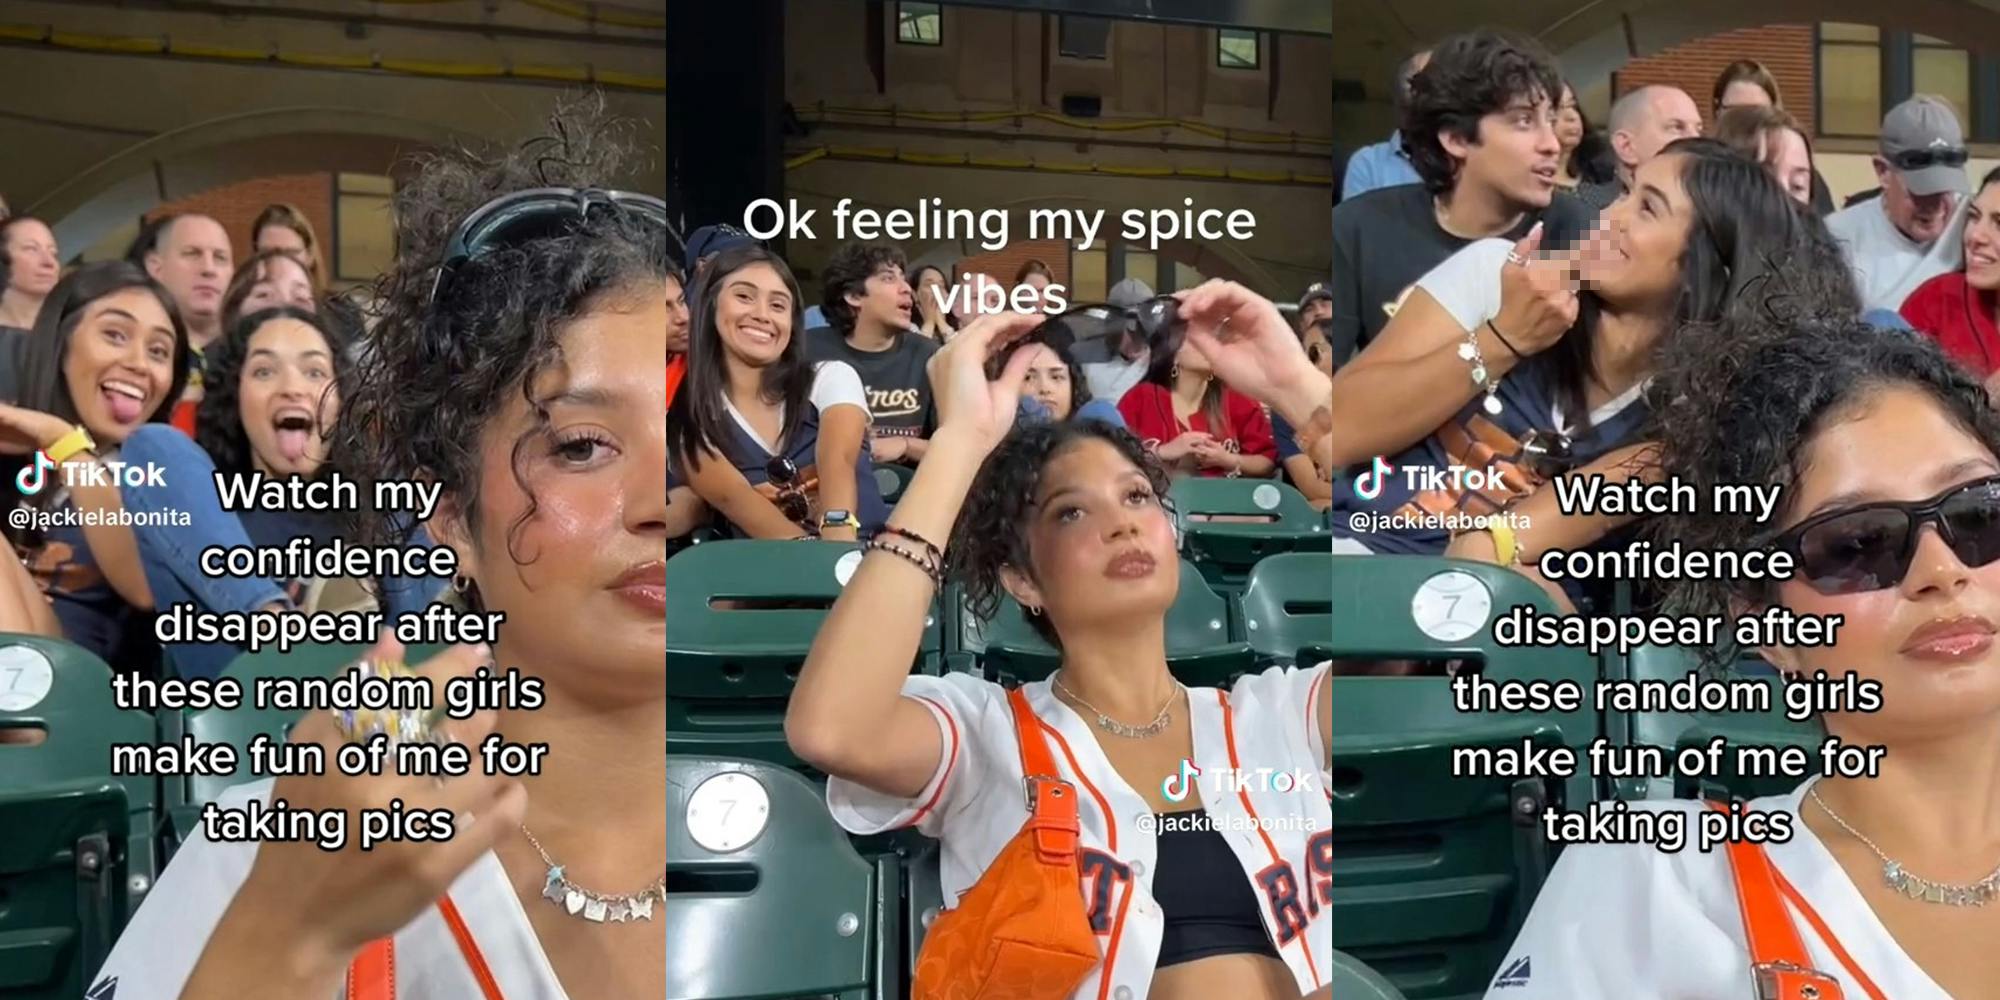 Woman goes viral for showing bullies laughing at her in TikTok